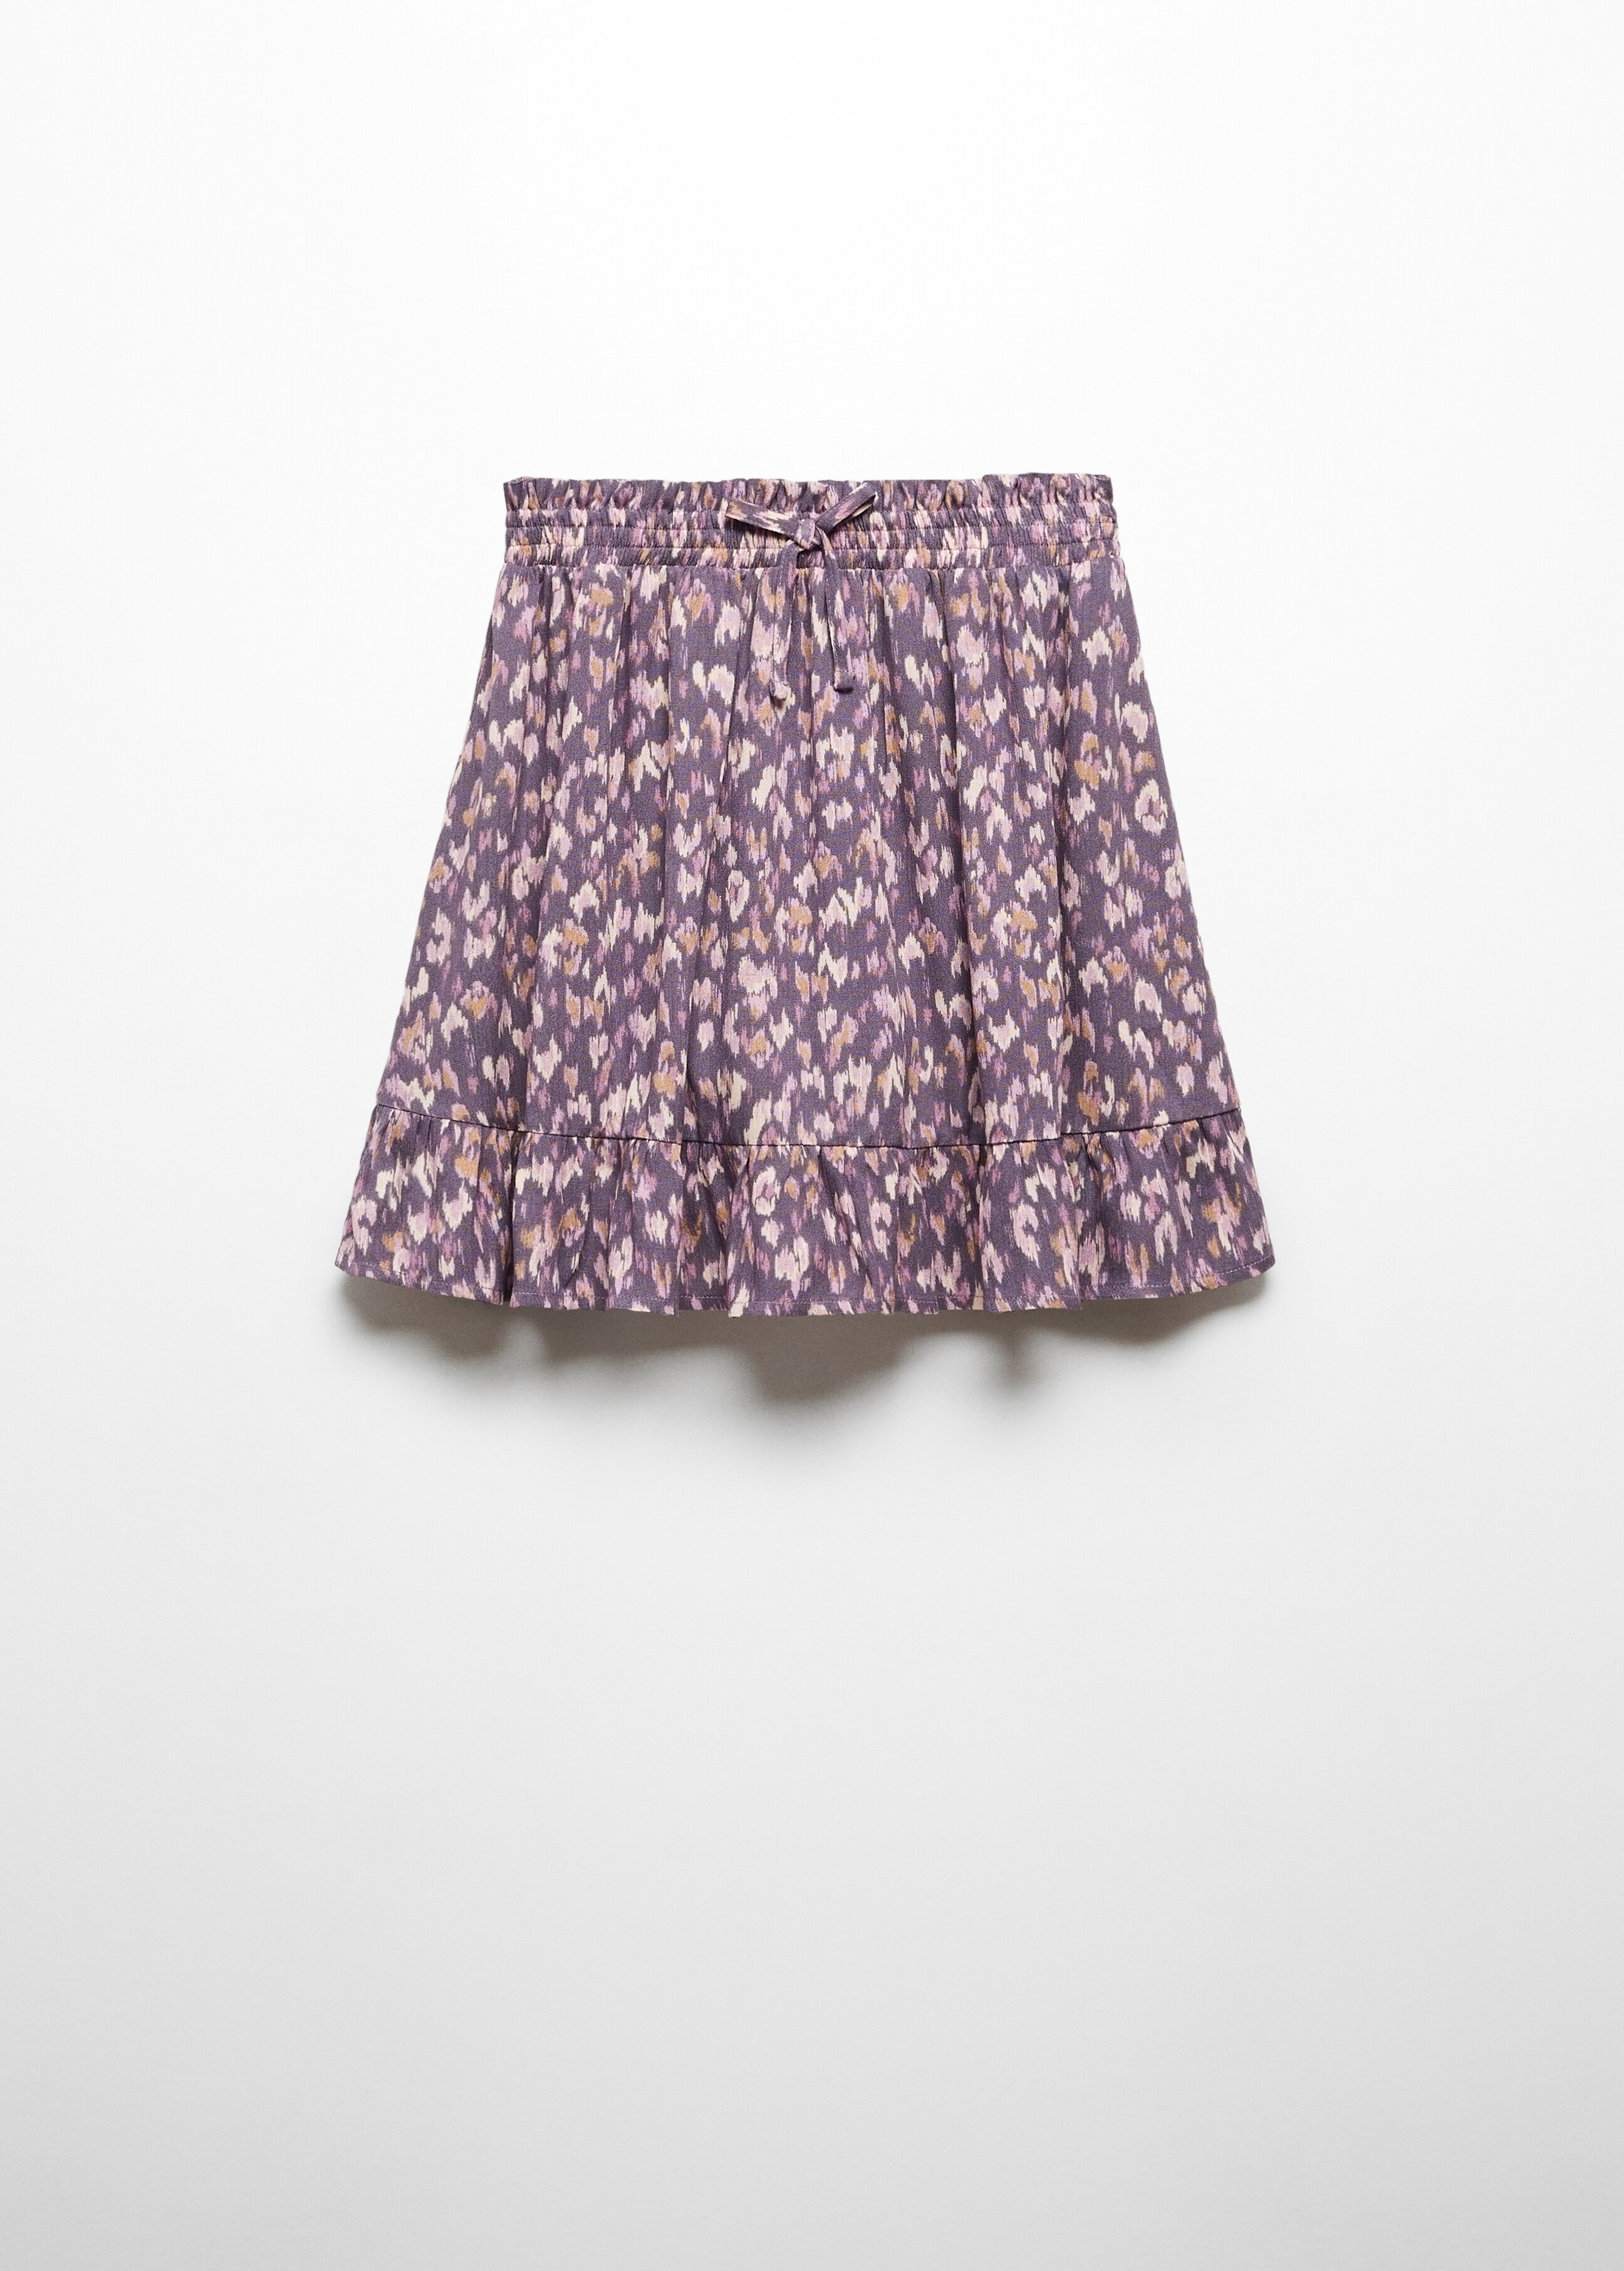 Ruffle printed skirt - Article without model